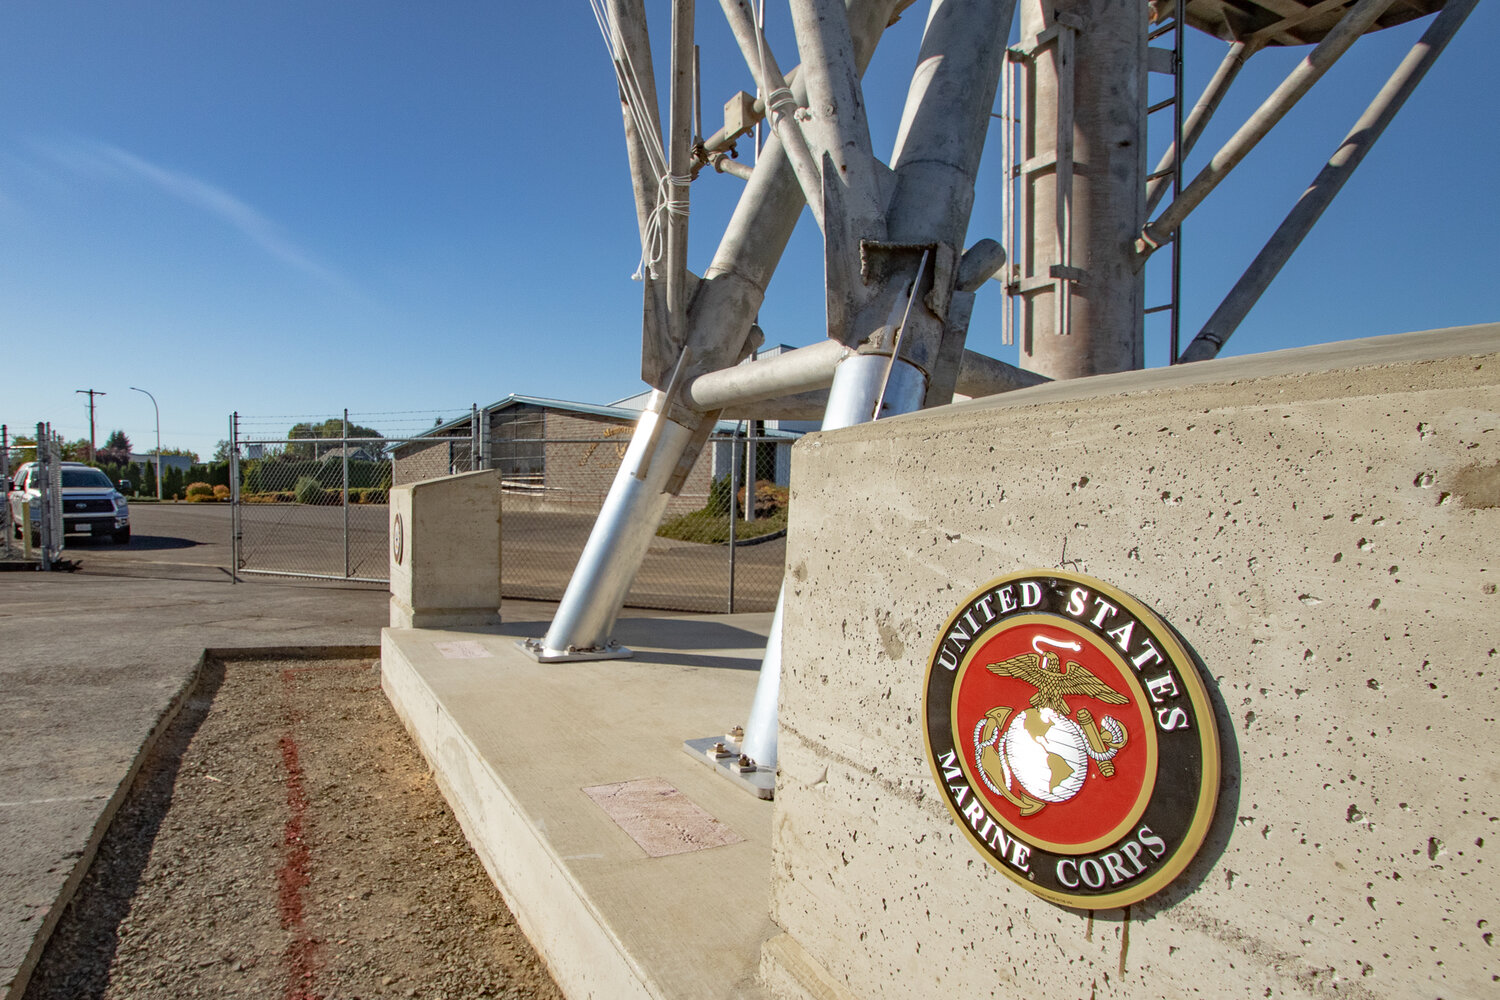 The U.S. Marine Corps logo sits mounted on one of two concrete encased containers for visitors to put coins in following a naval tradition known as mast stepping, where coins are placed under a mast before it's mounted on a ship and is thought to bring good luck. It is believed the tradition originated in ancient Rome when sea travel was dangerous, and the coins were placed to ensure sailors would be able to cross into the afterlife if the ship was sunk.